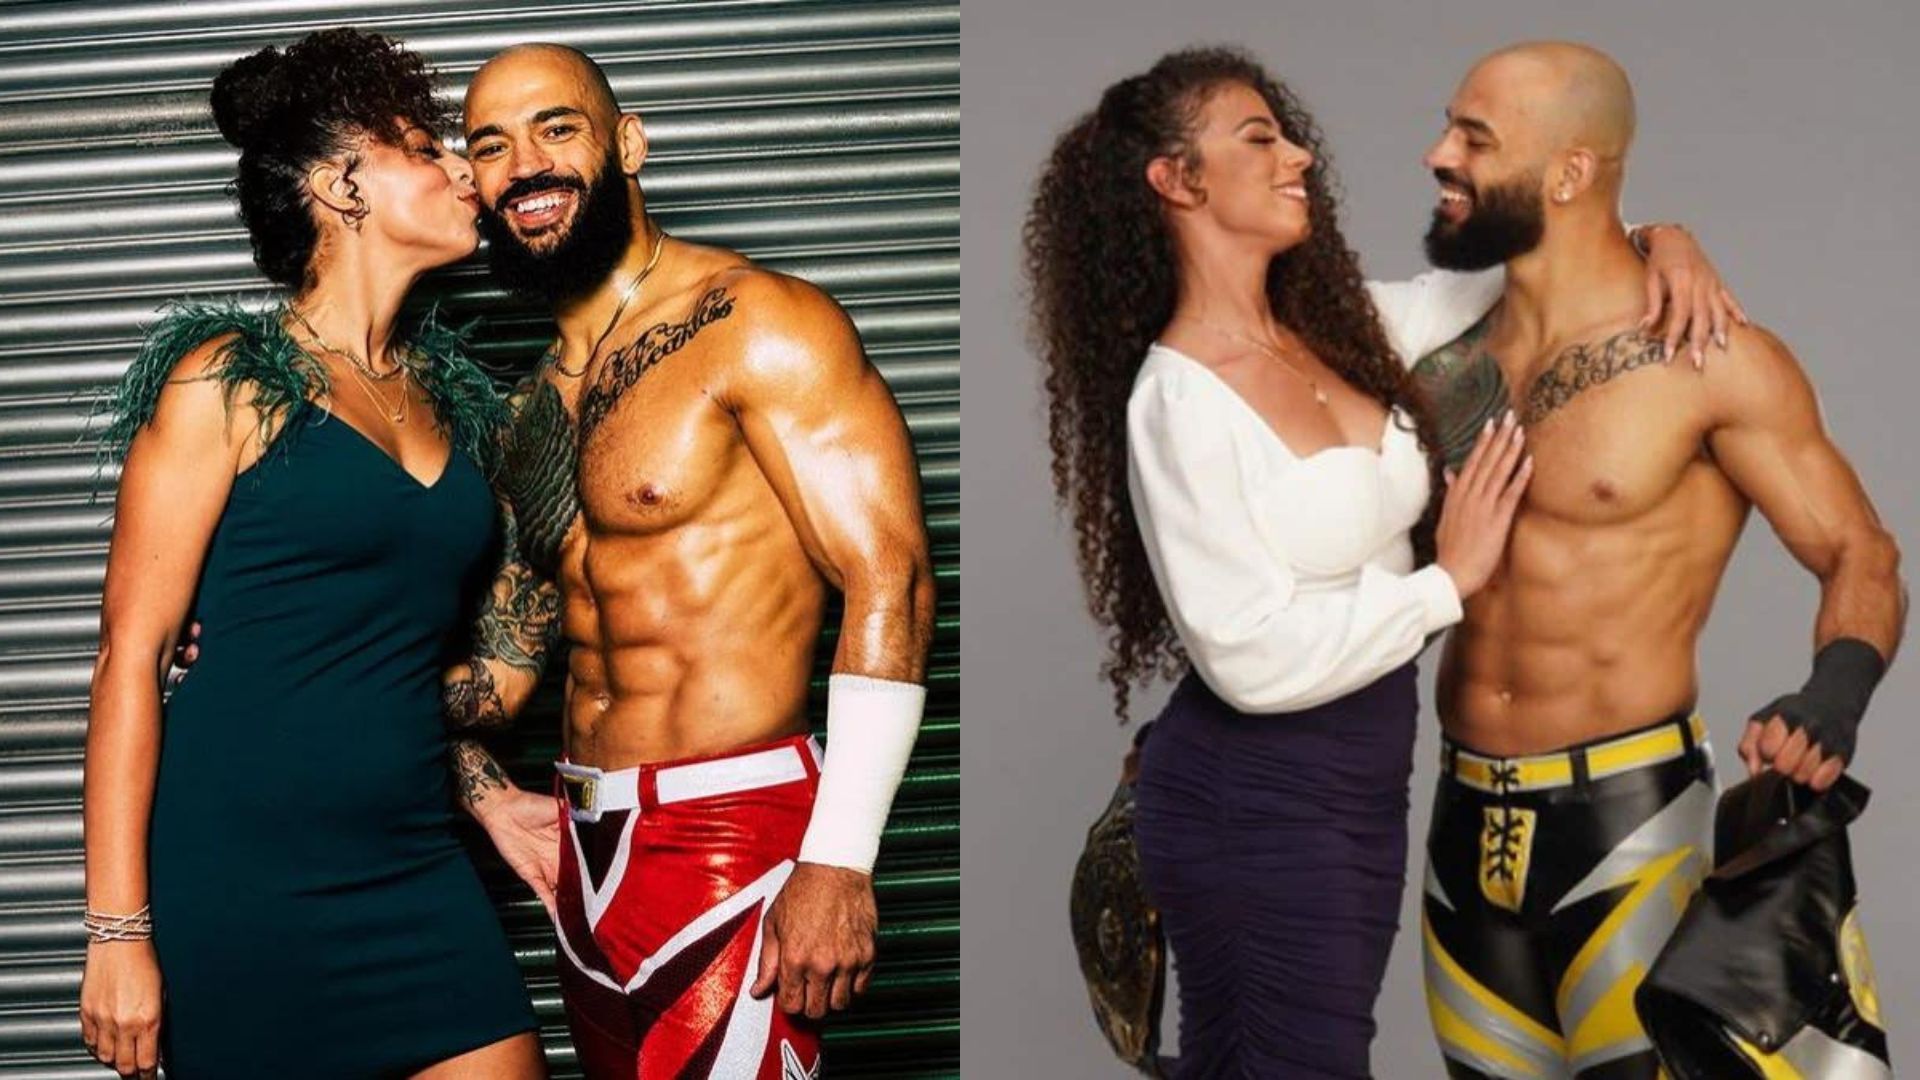 Ricochet and Samantha Irvin are engaged